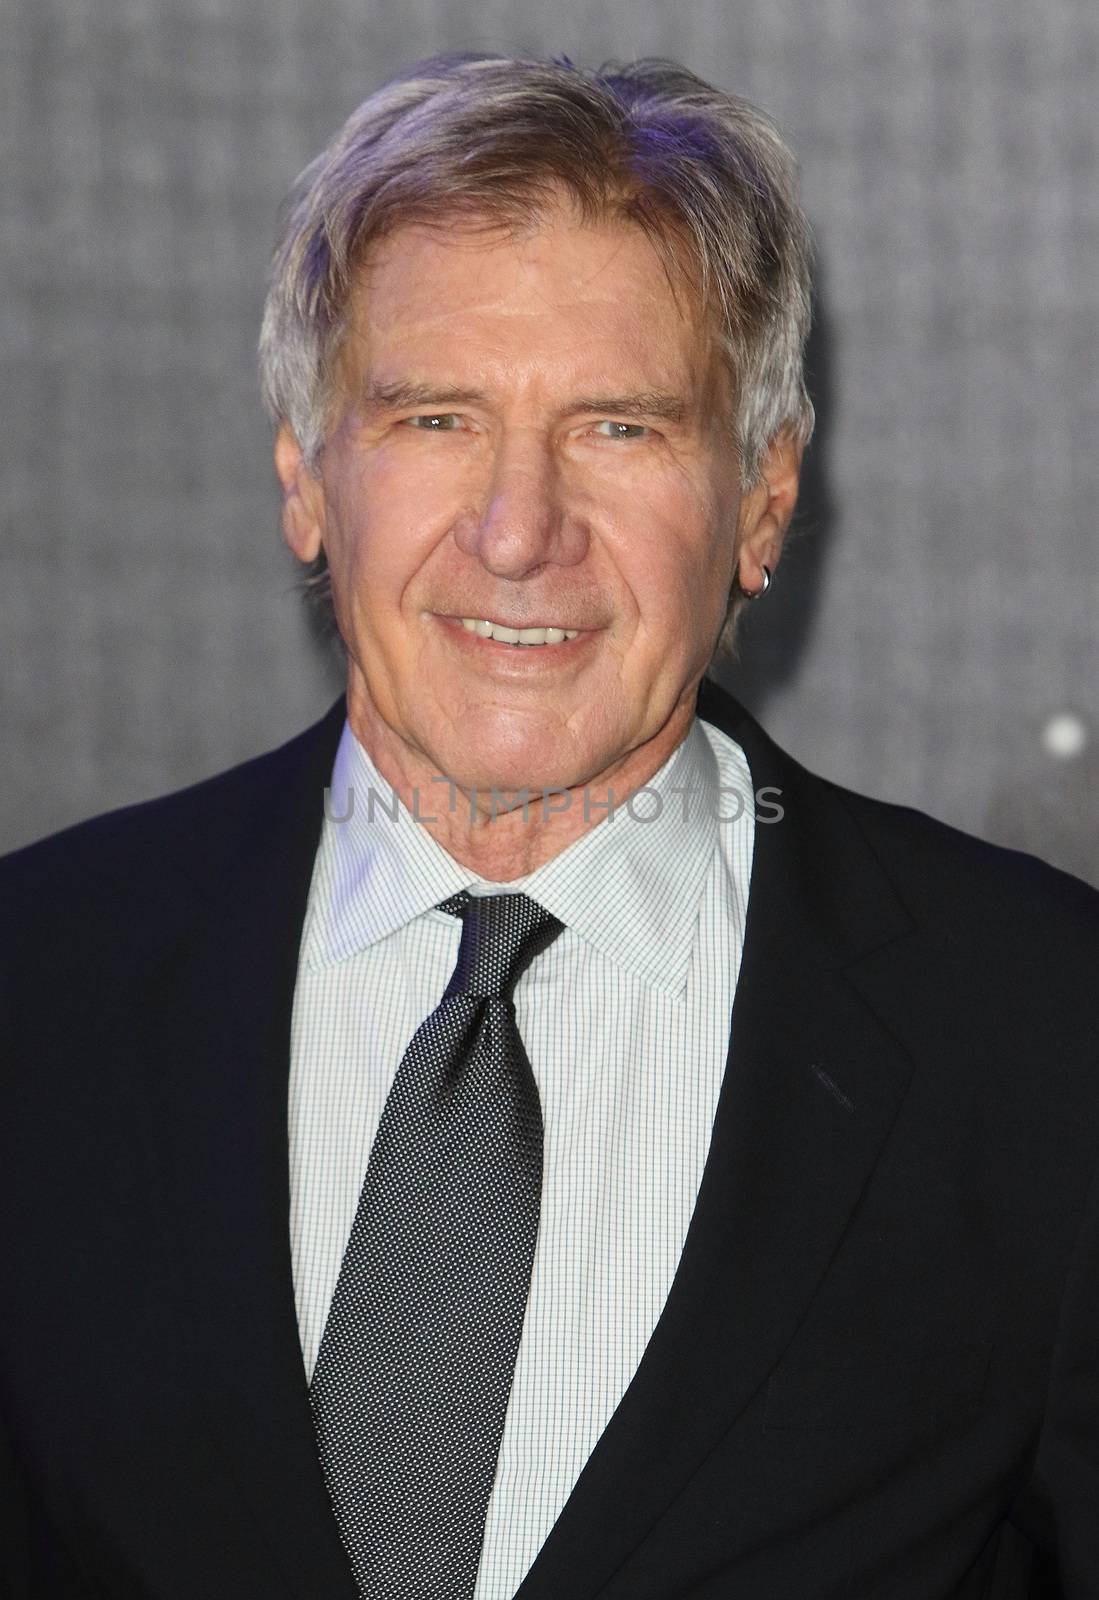 UNITED-KINGDOM, London : Star Wars actor Harrison Ford poses for photographers while Star Wars cast, crew and celebrities hit the red carpet for the last episode The Force Awakens European Premiere on December 16, 2015 in central London.   	